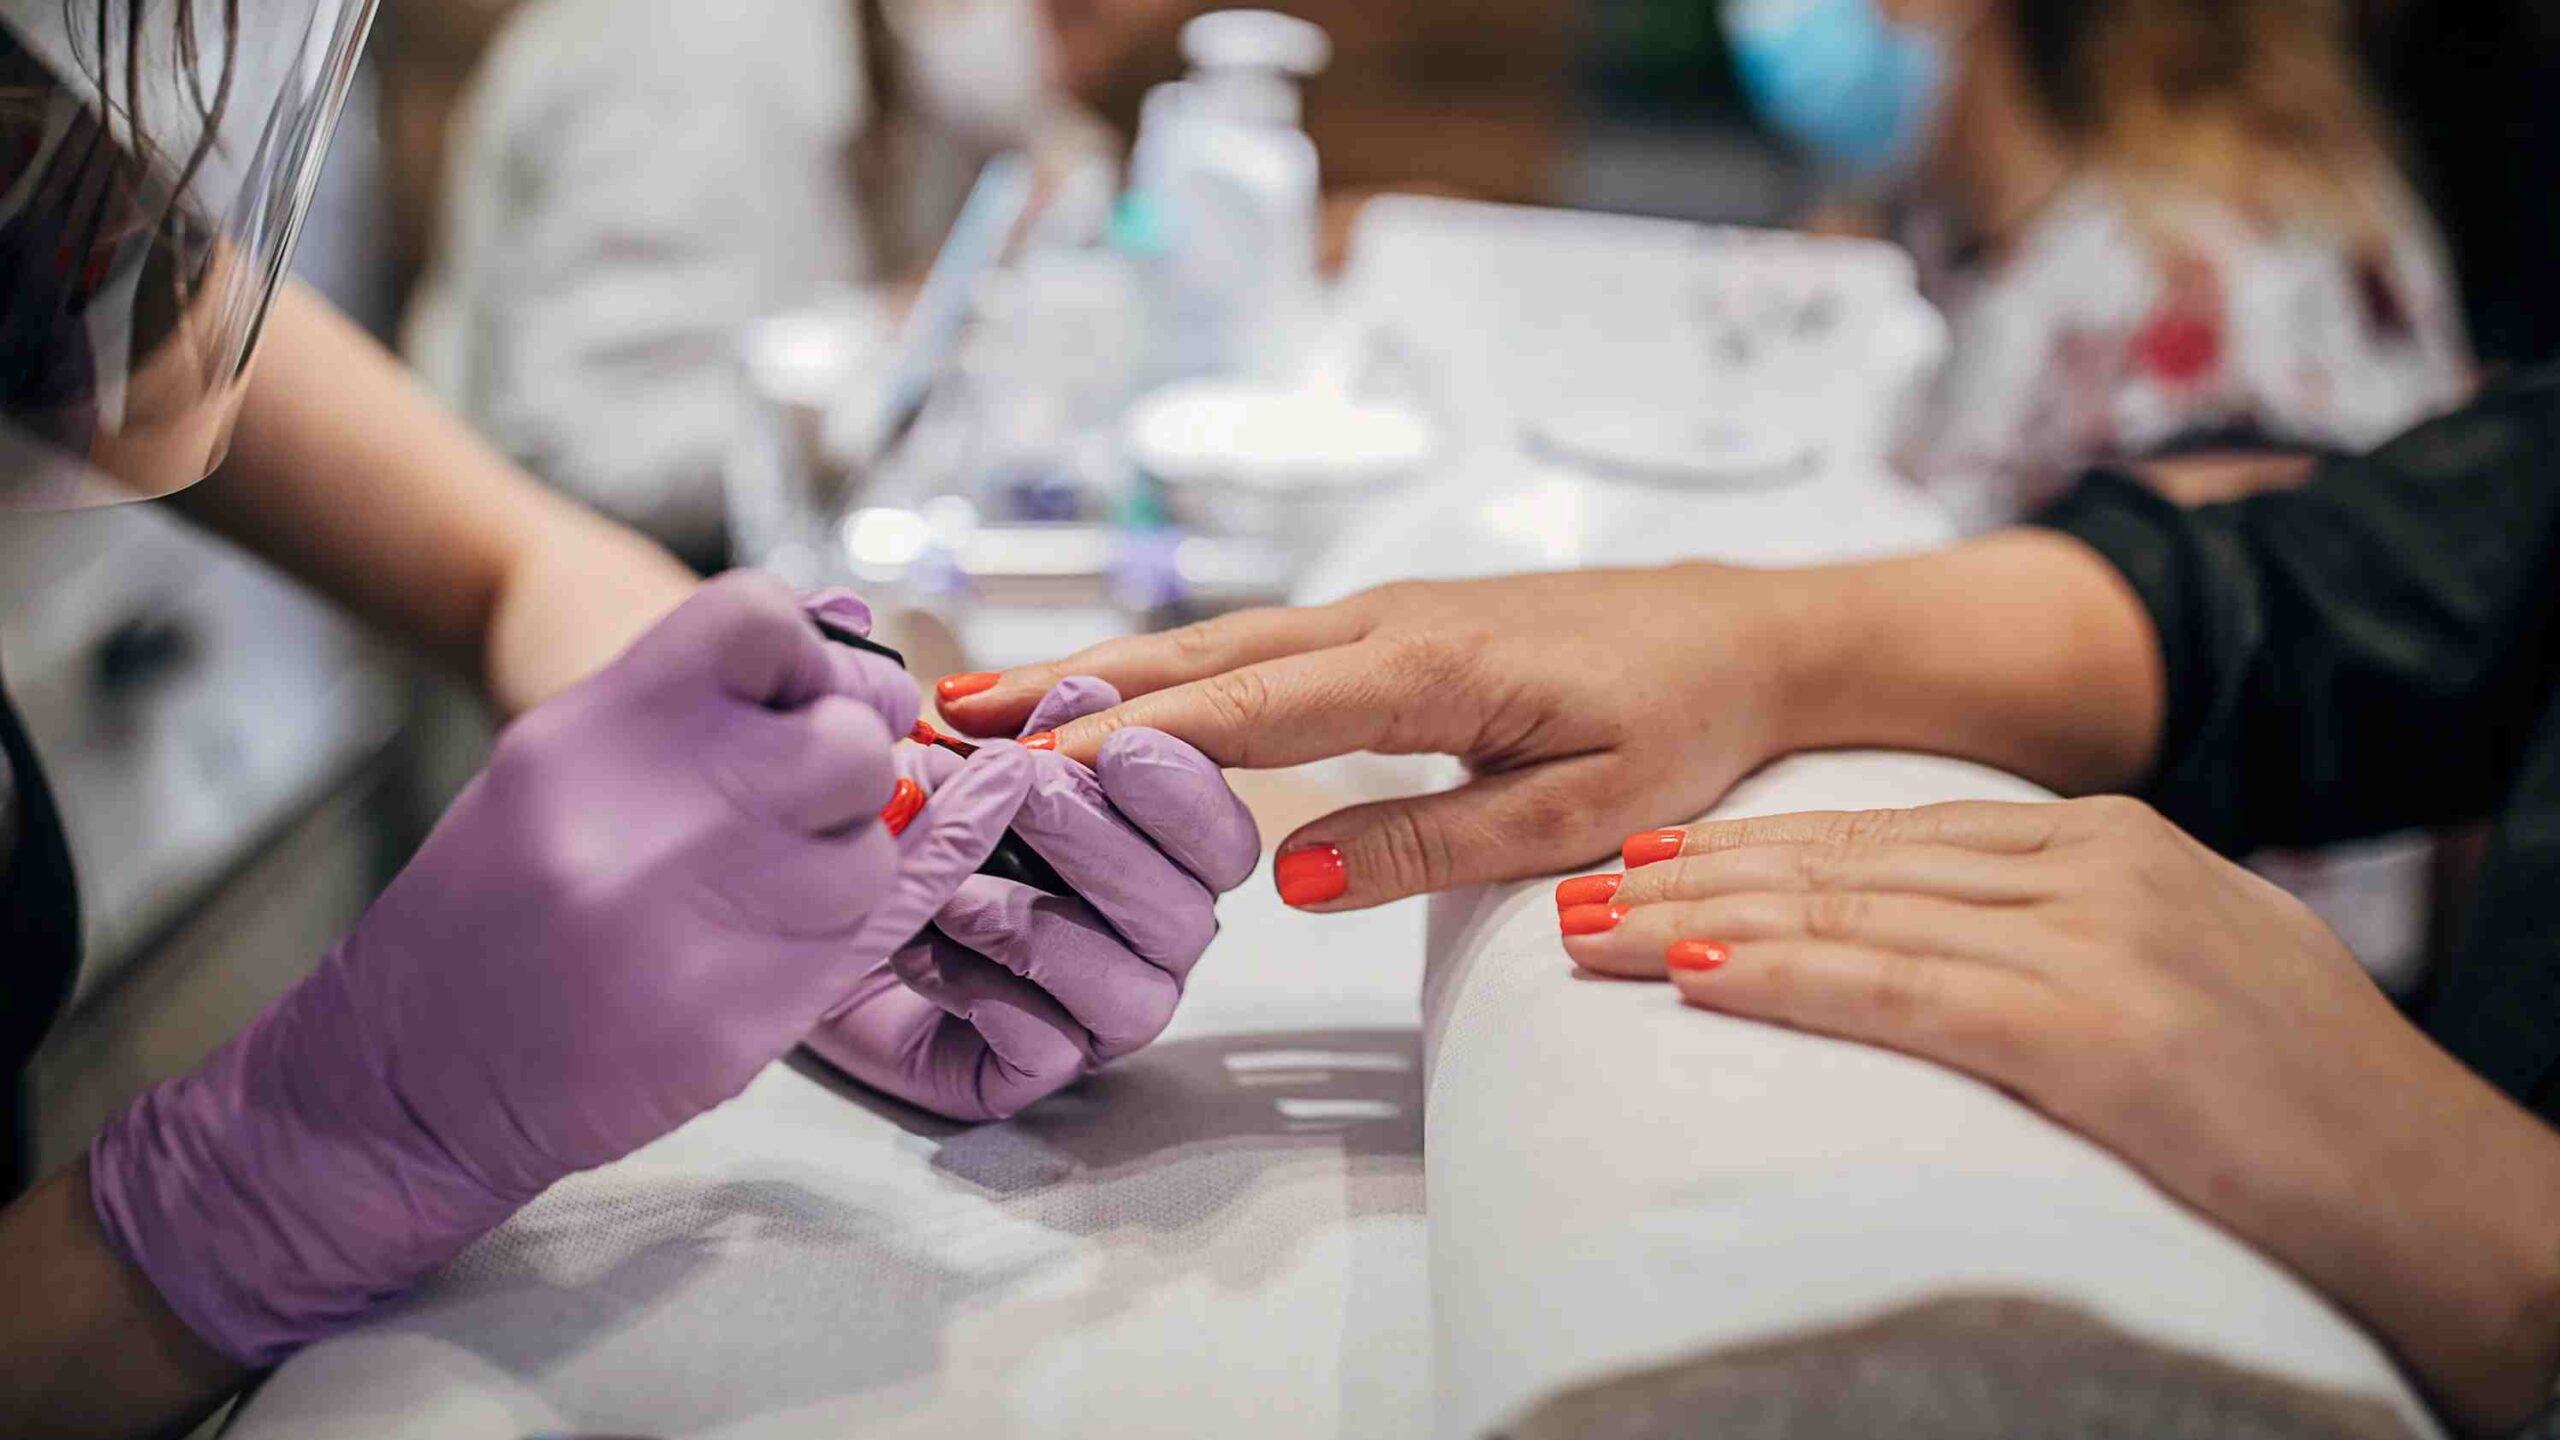 Nail salons carry high risk of infection, so choose wisely!